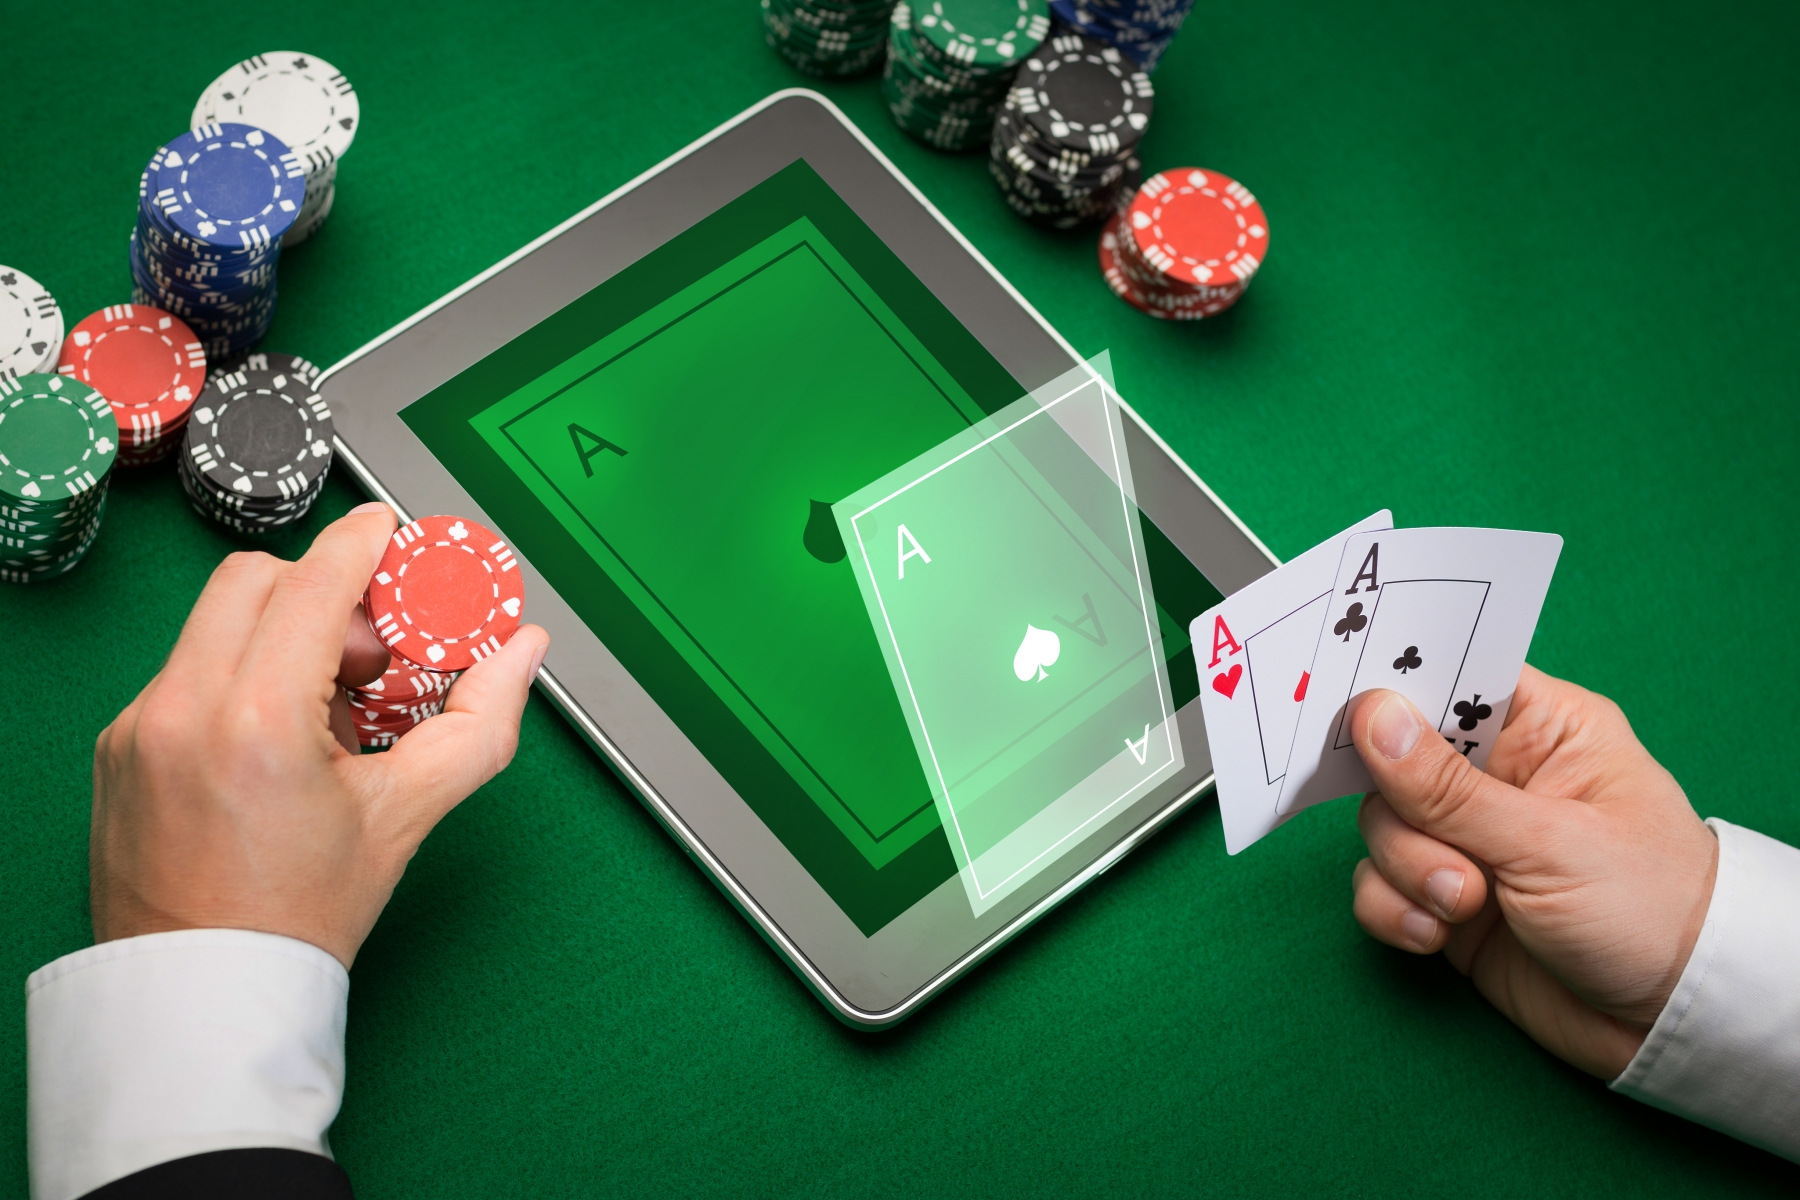 10813040-casino-poker-player-with-cards-tablet-and-chips